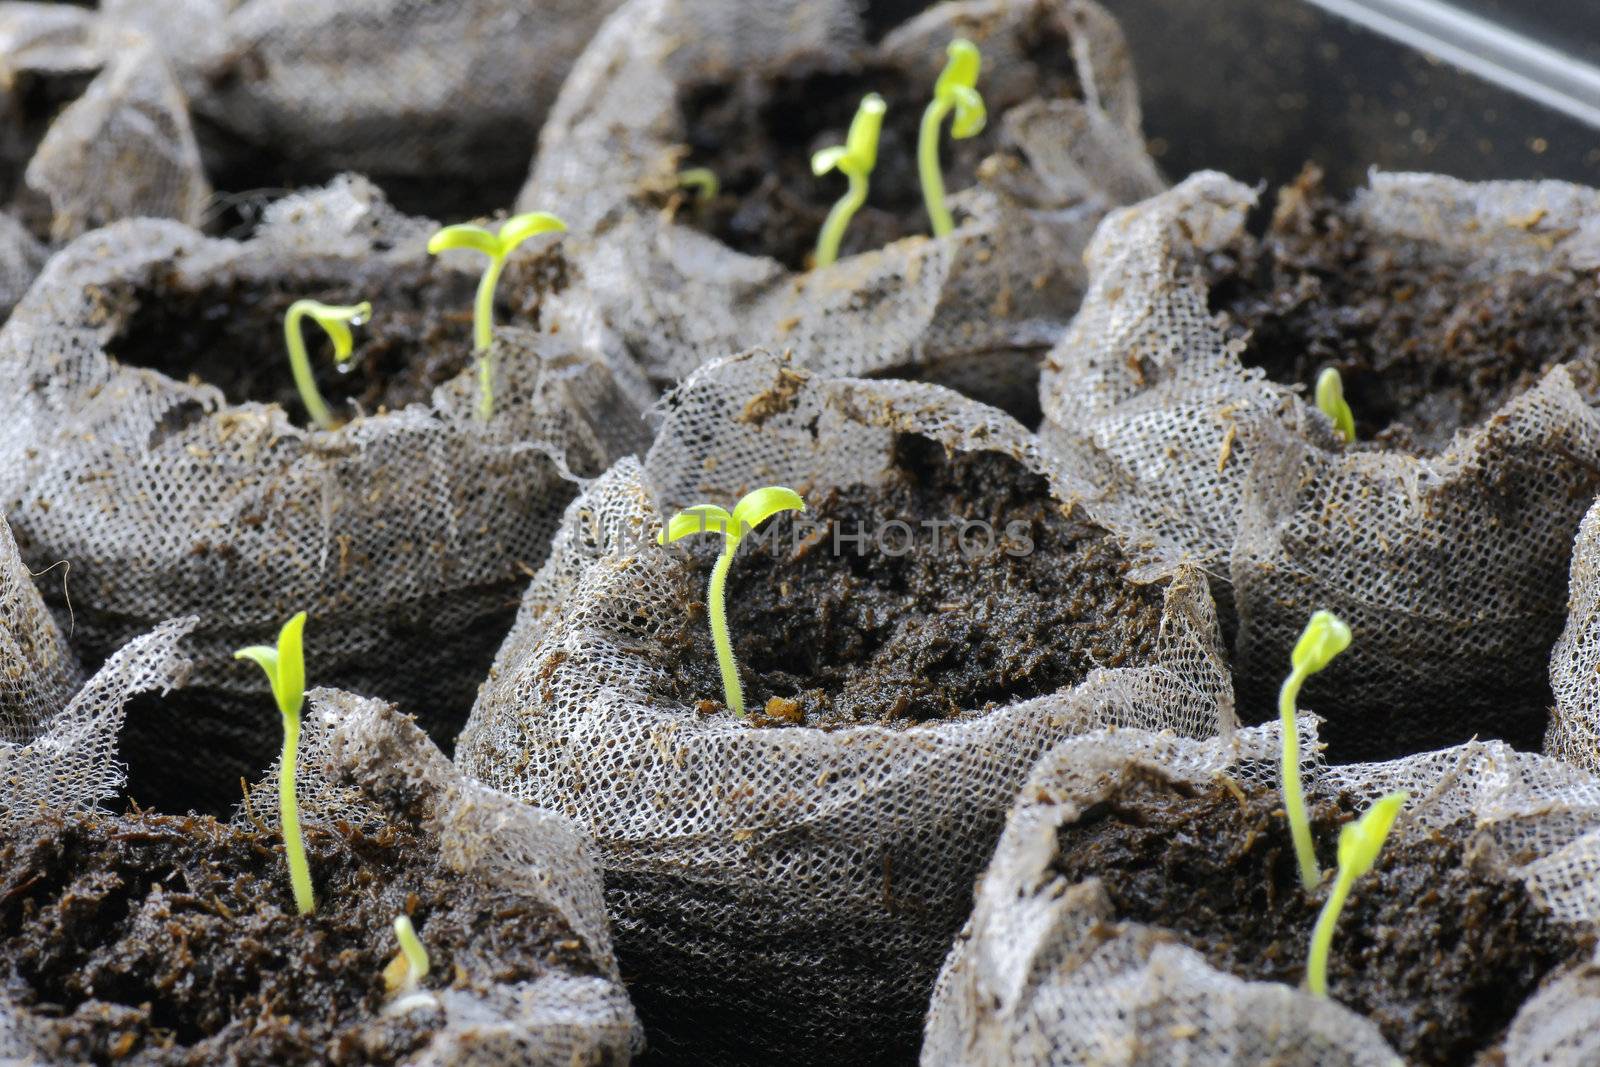 Tomato seedlings by Mirage3